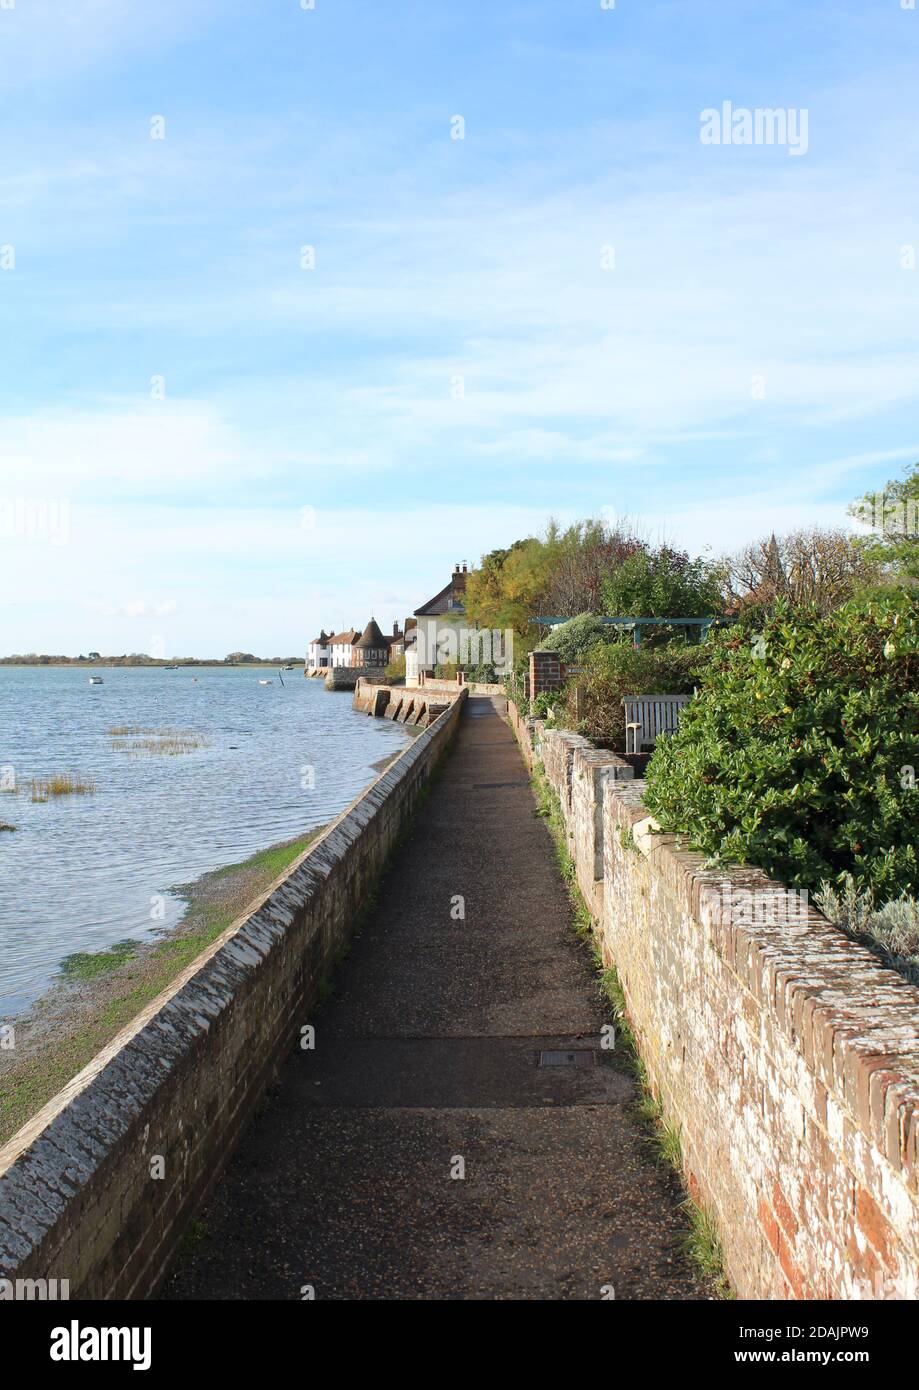 The trippet or footpath running alongside the harbour at Bosham, Chichester, West Sussex. Stock Photo